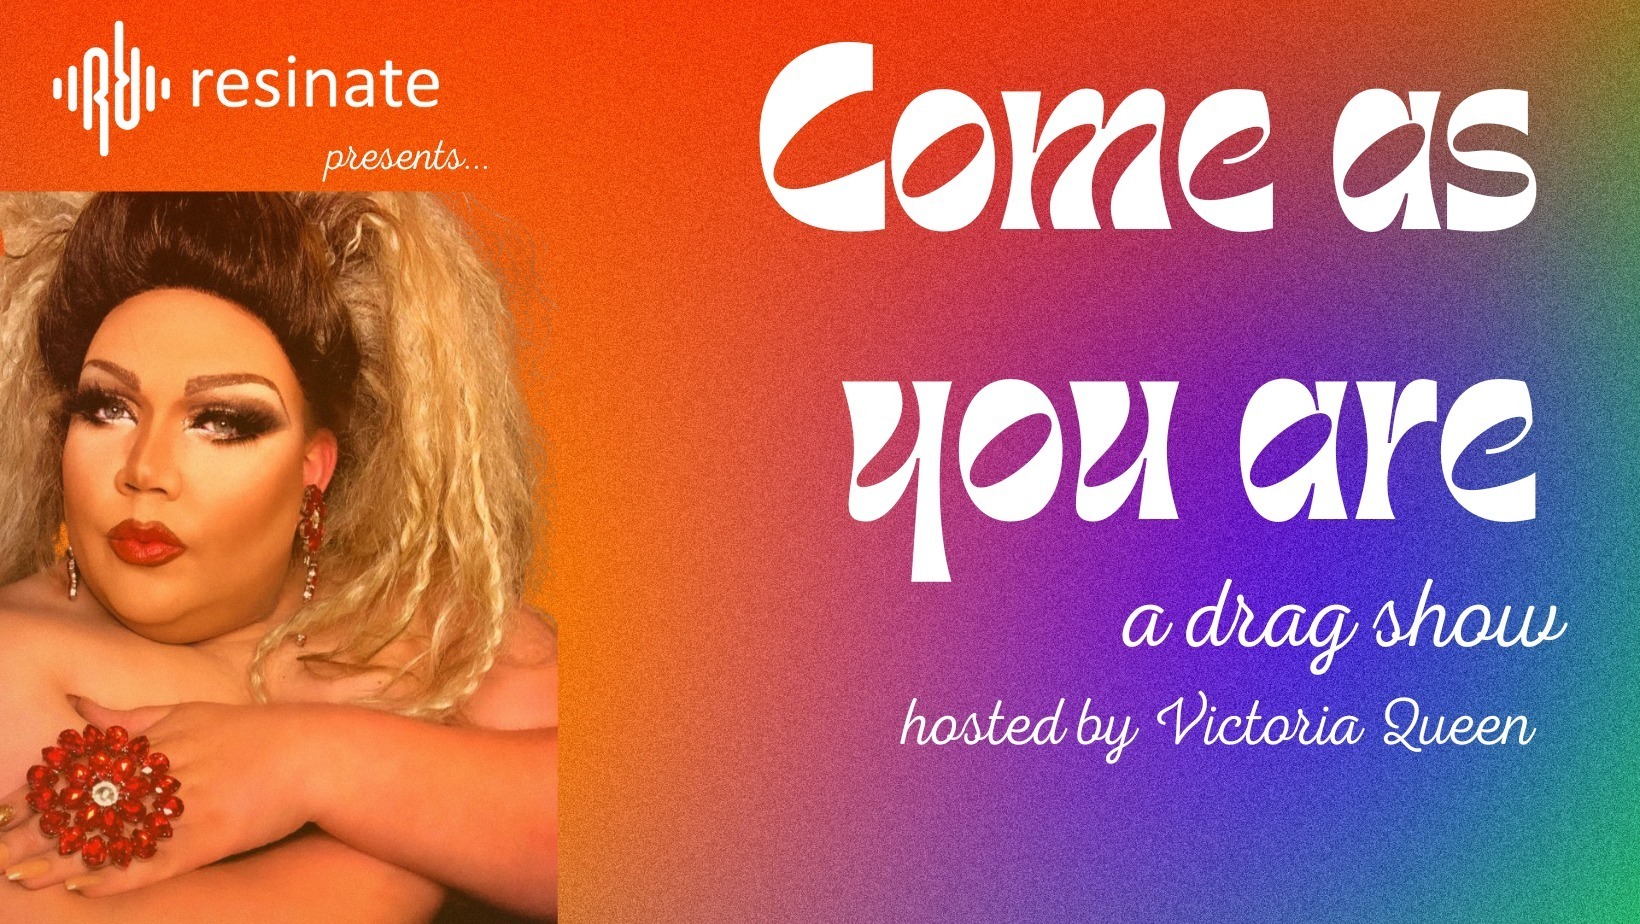 Resinate Celebrates Pride with "Come As You Are" Drag Show hosted by Victoria Queen June 30, Northampton, Massachusetts, United States